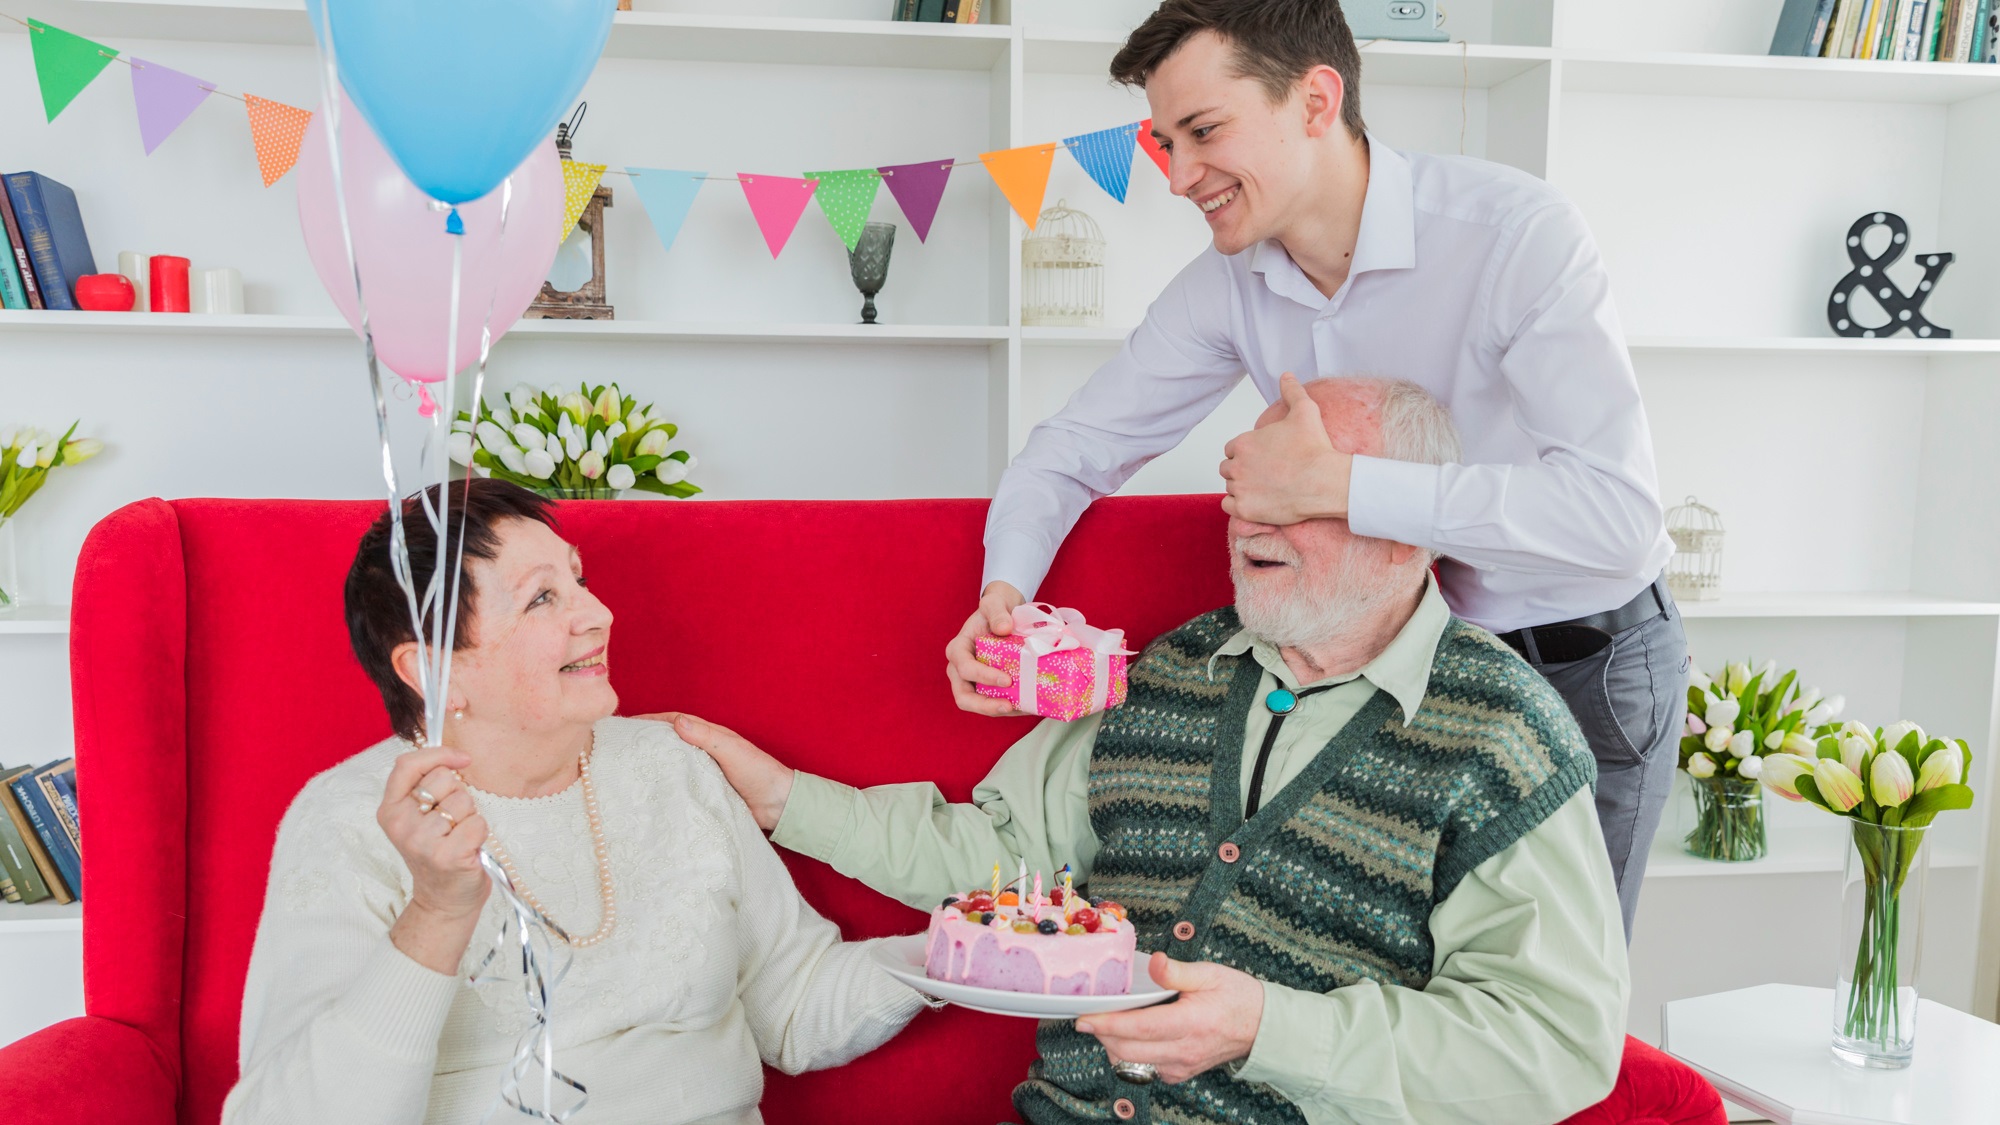 son-giving-gift-to-elderly-parents-on-birthday